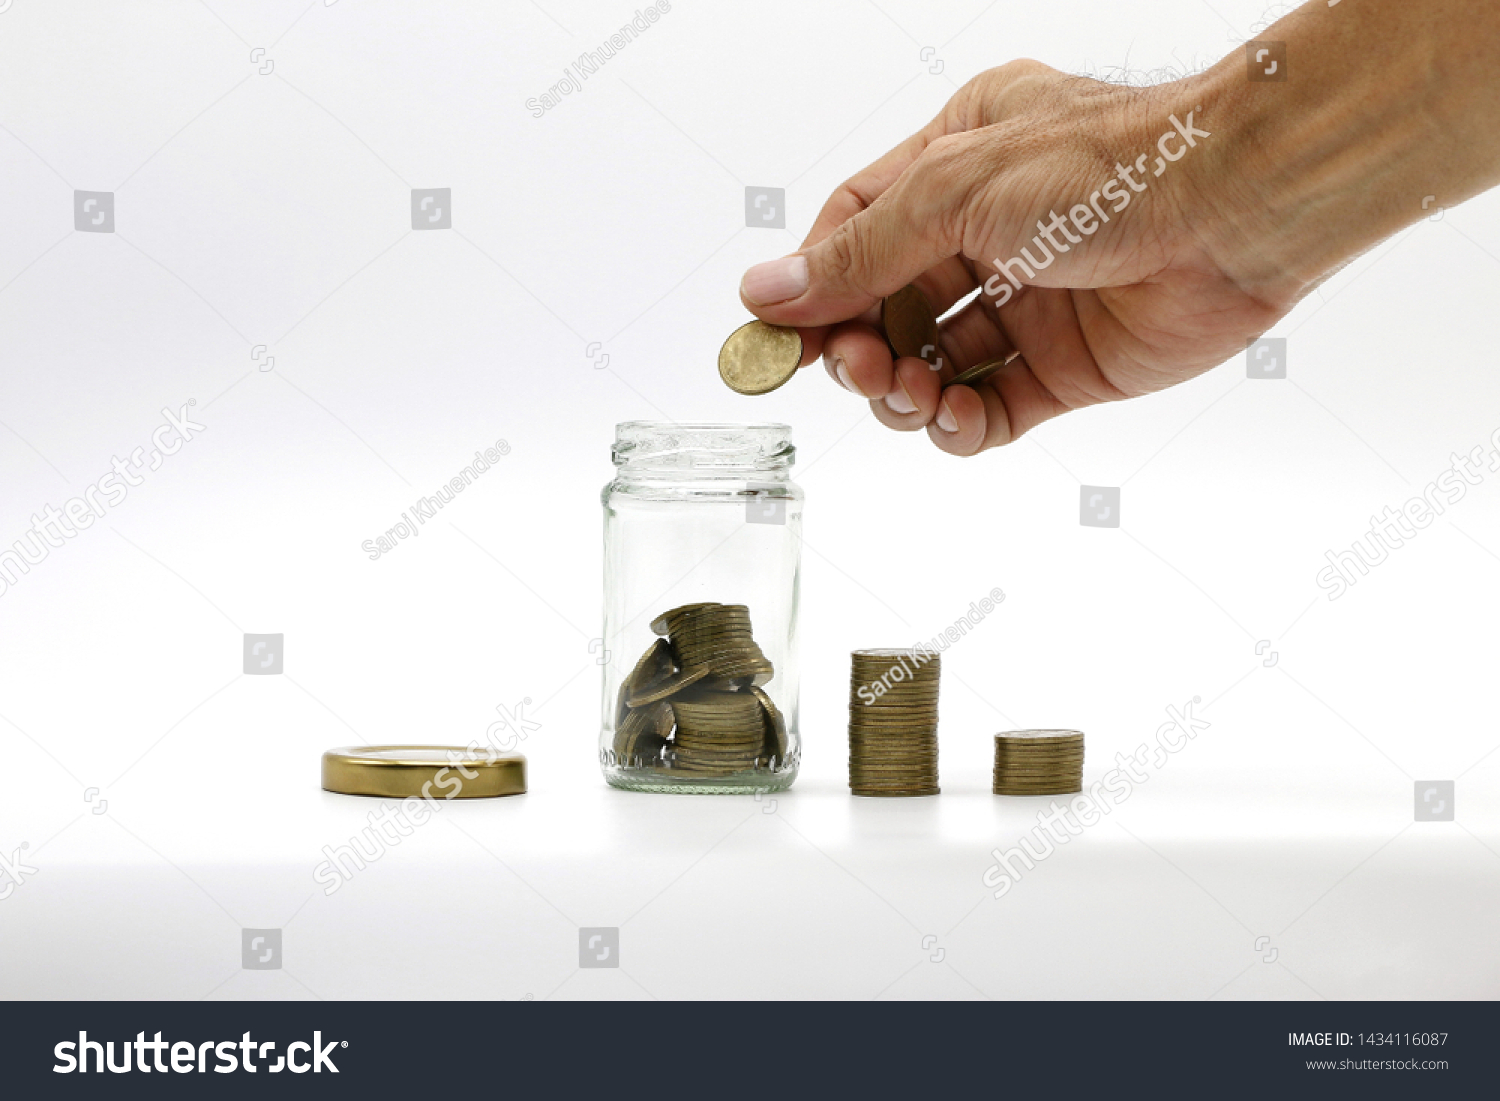 The hand is coin saving,saving in the saving box on white background with copy space. #1434116087